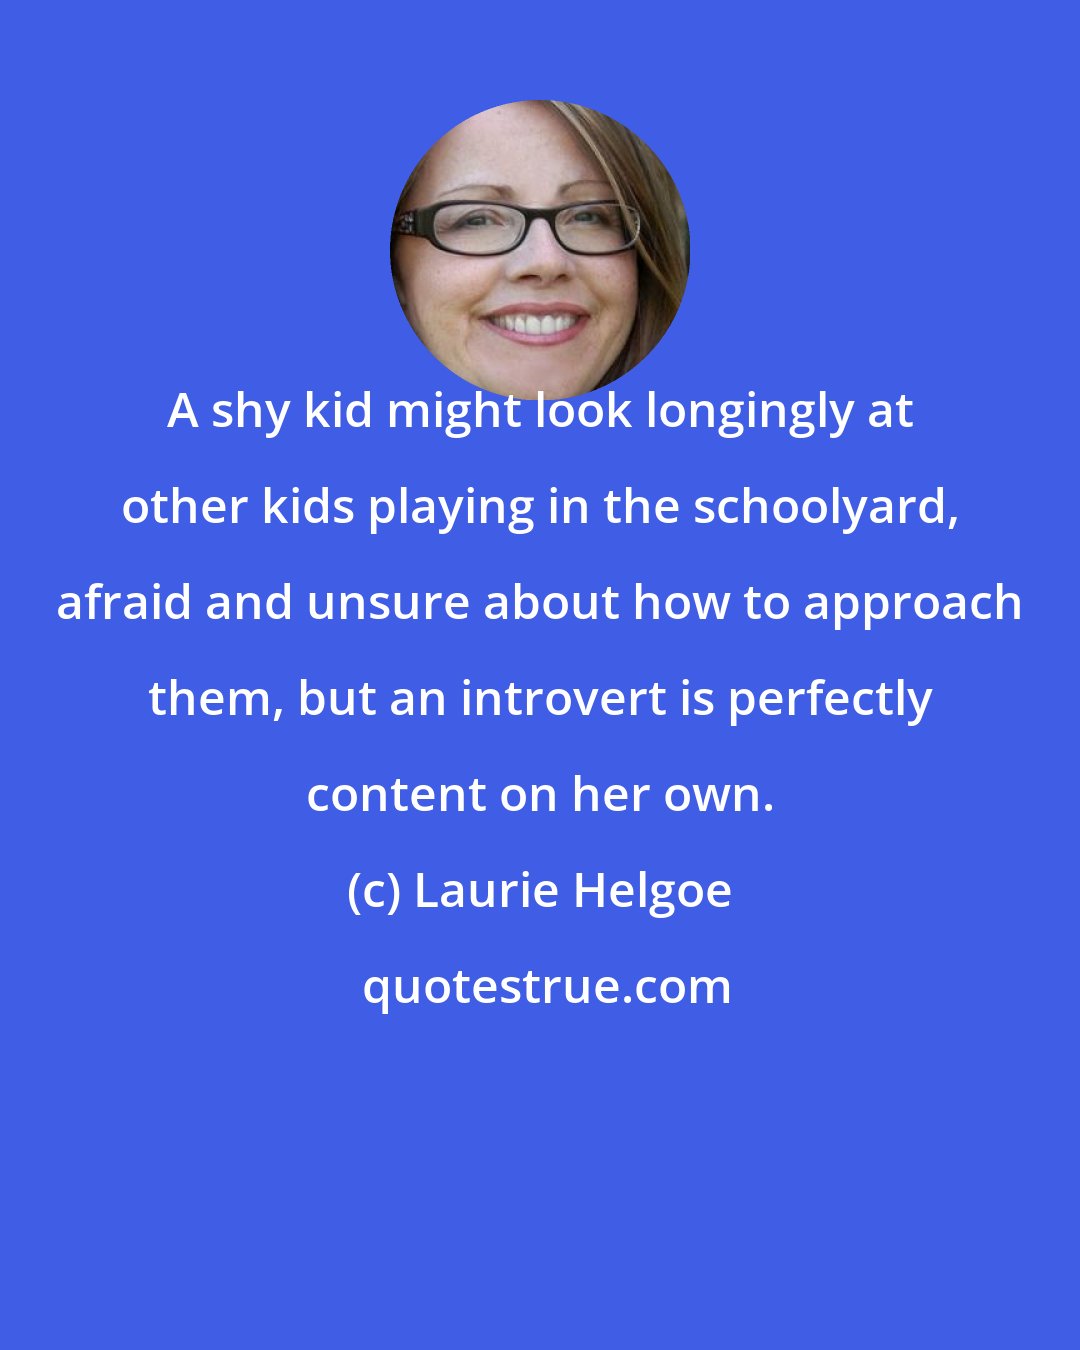 Laurie Helgoe: A shy kid might look longingly at other kids playing in the schoolyard, afraid and unsure about how to approach them, but an introvert is perfectly content on her own.